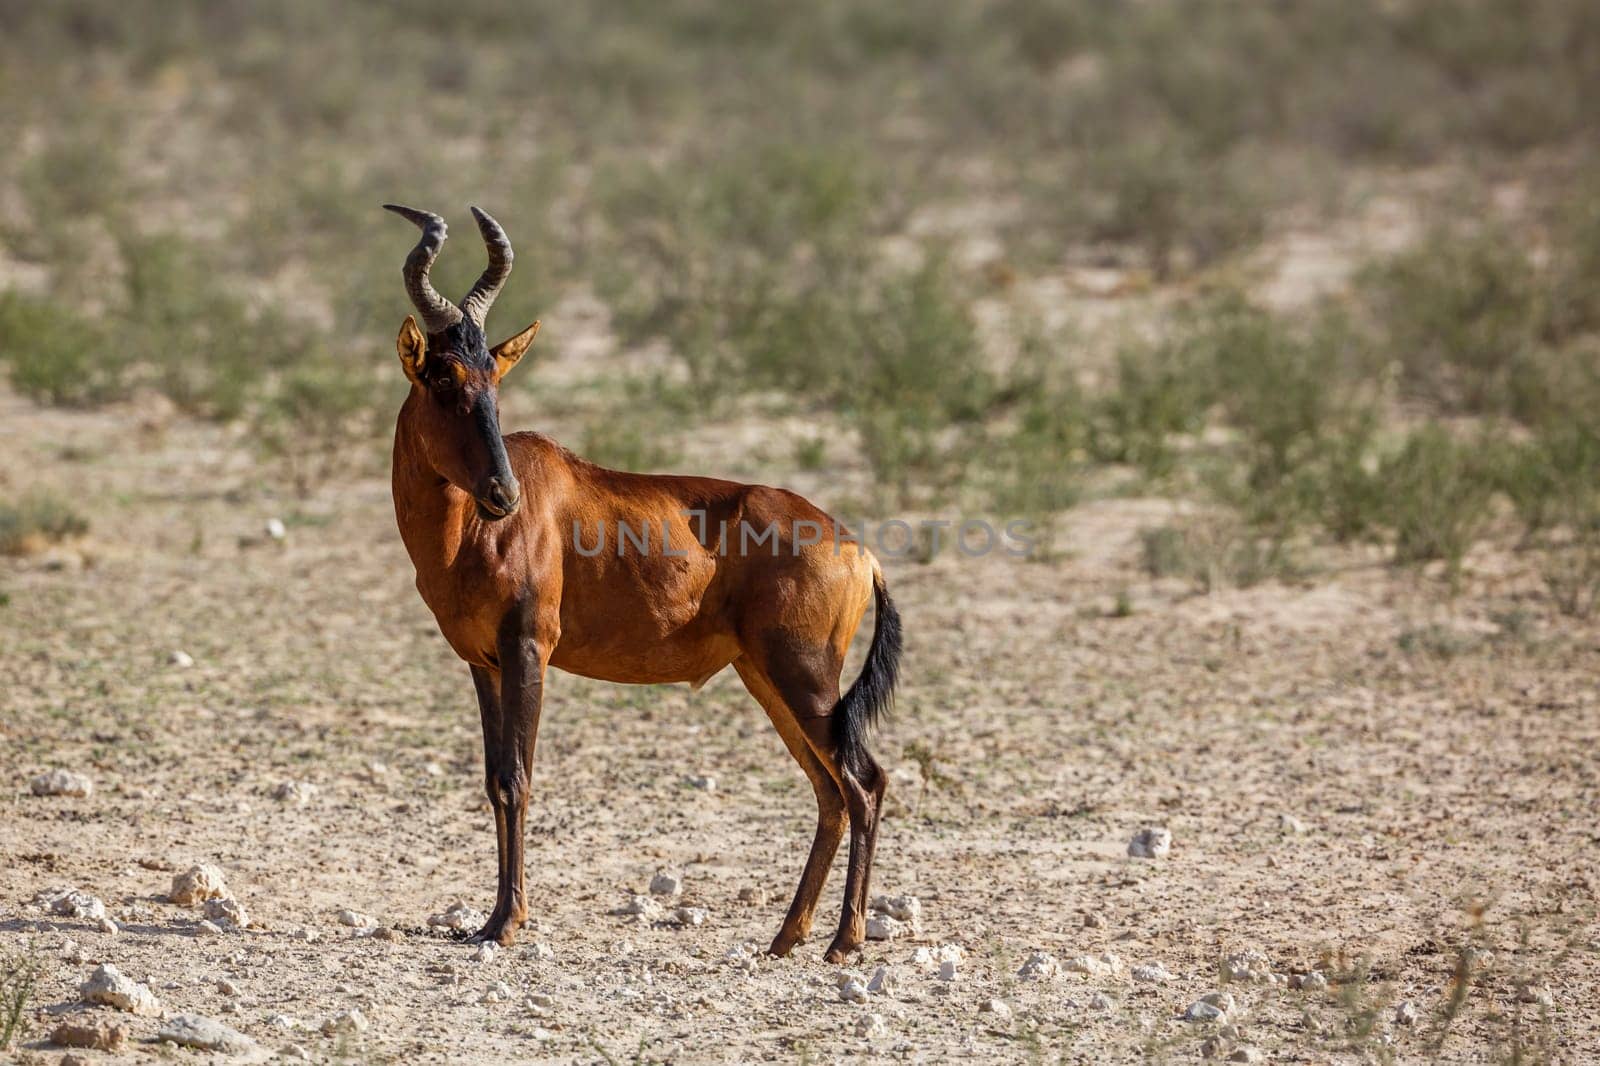 Hartebeest standing in dry land in Kgalagadi transfrontier park, South Africa; specie Alcelaphus buselaphus family of Bovidae